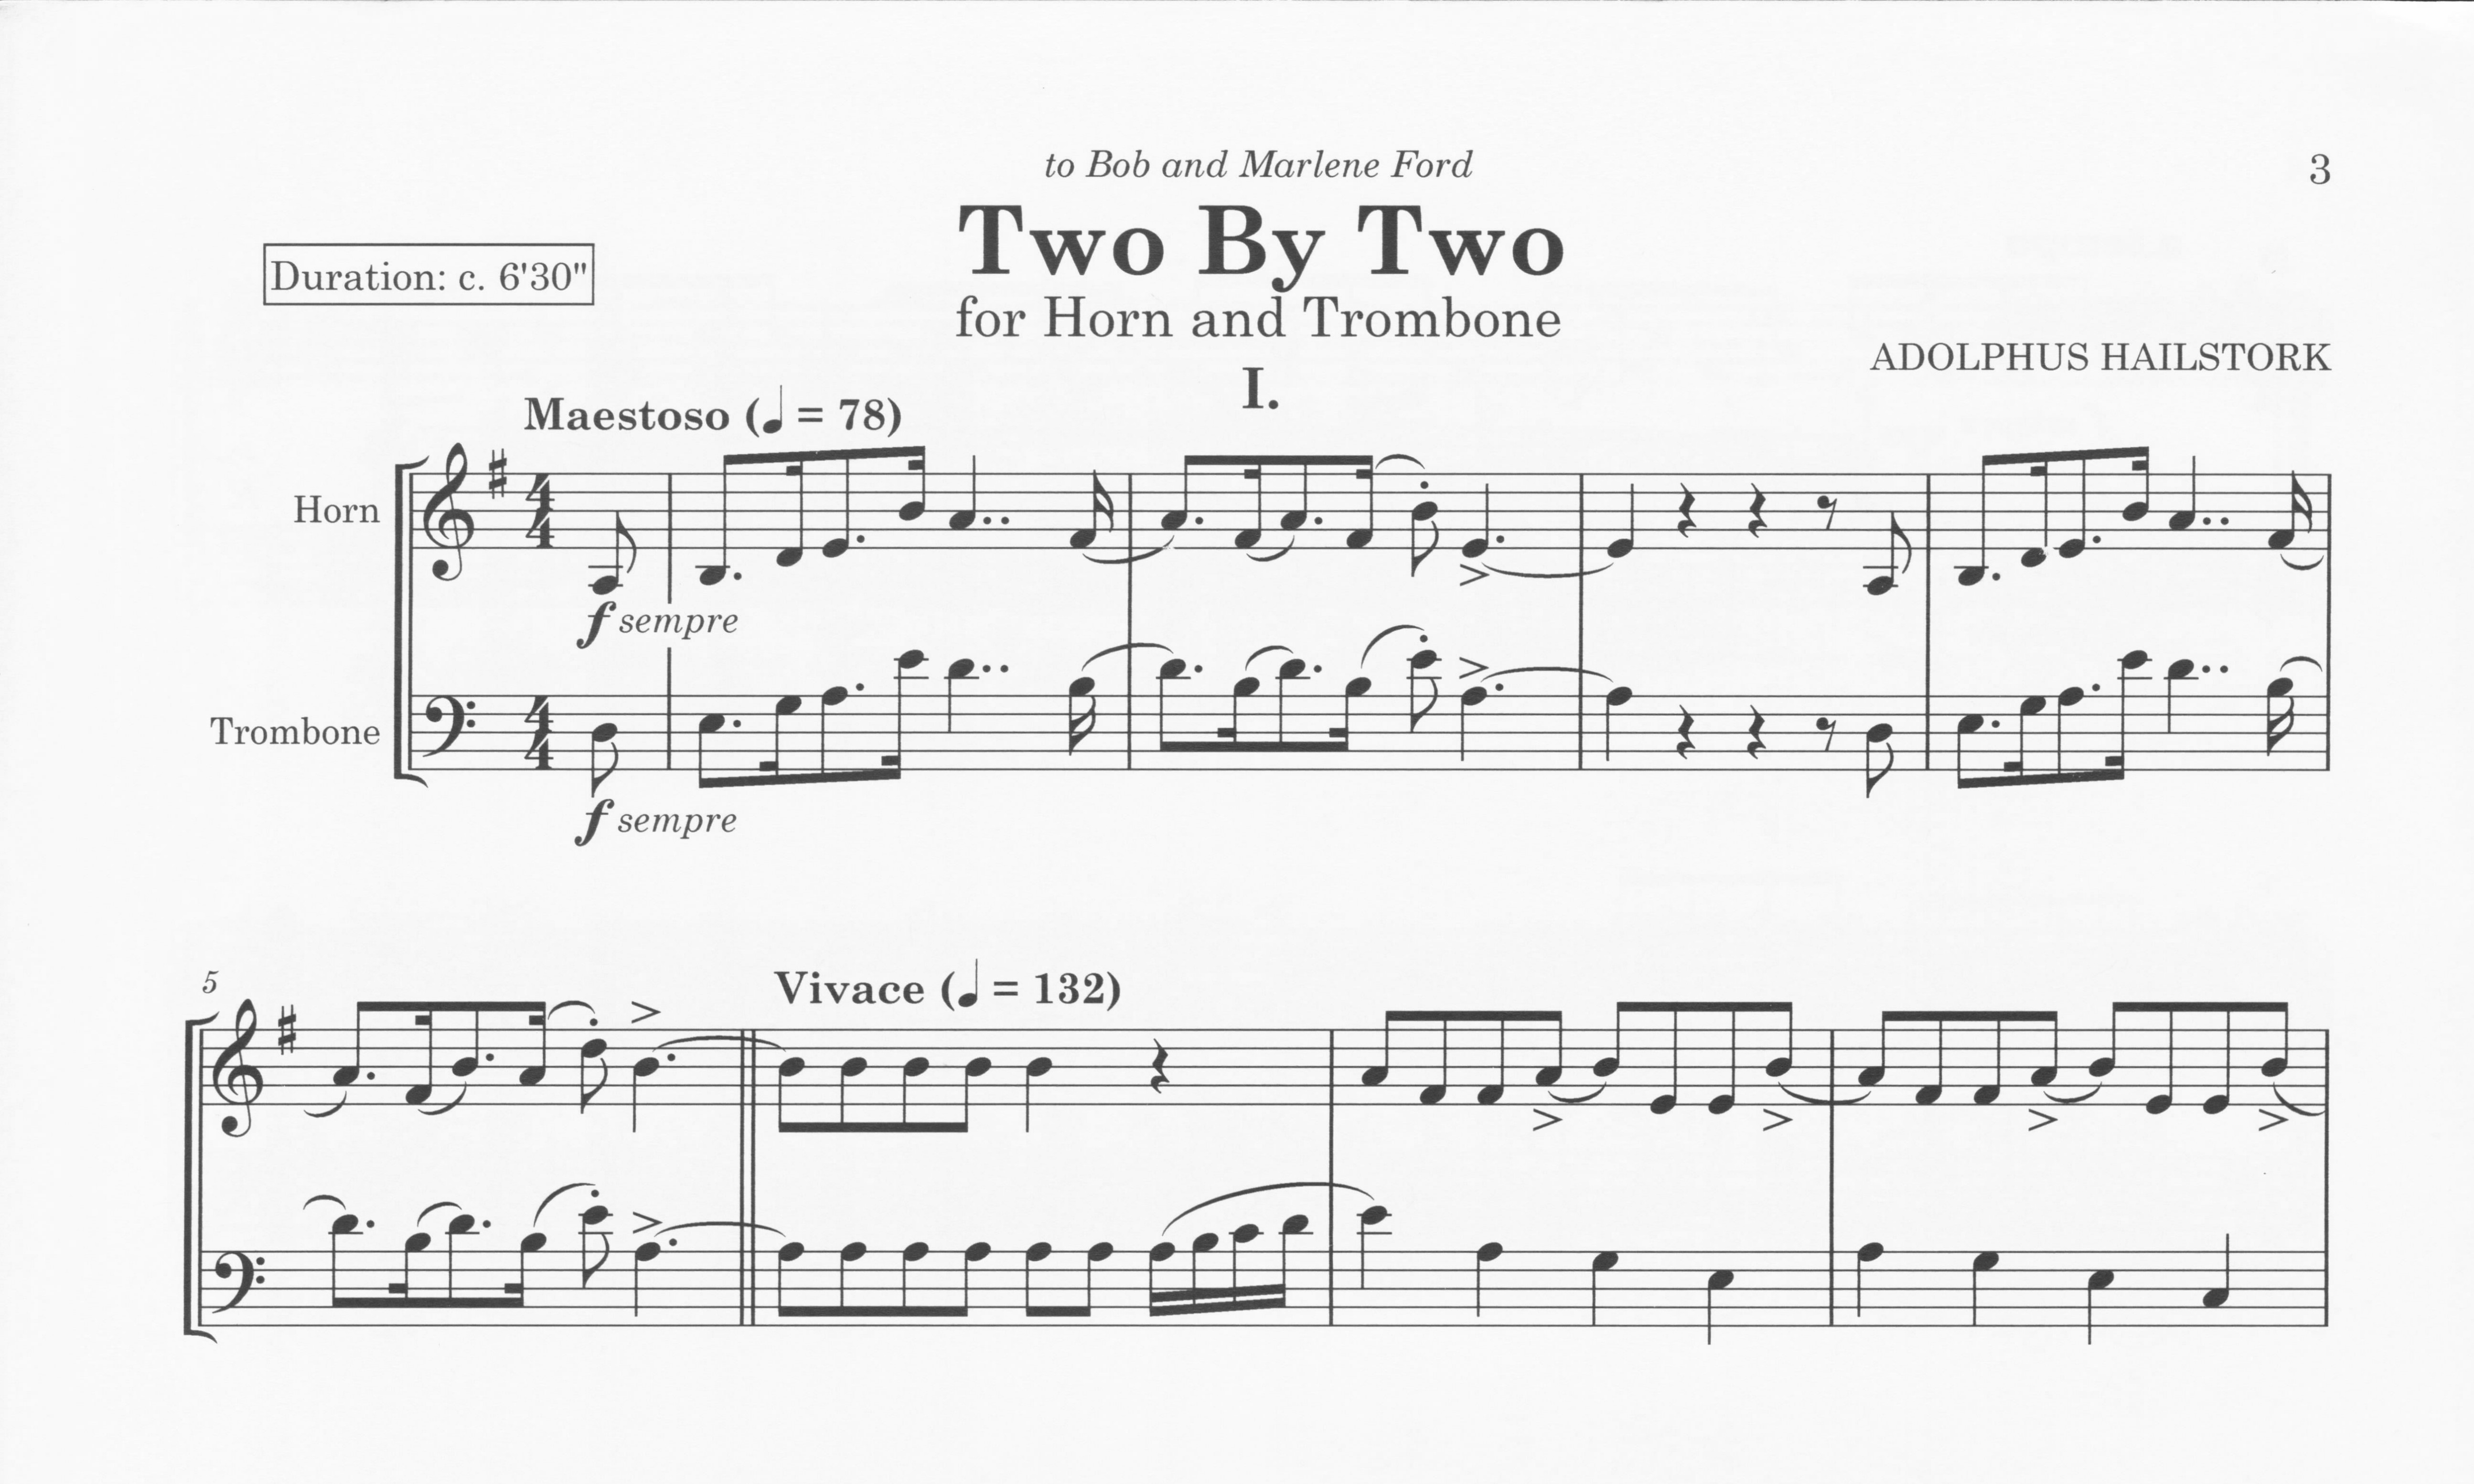 Two by Two - Adolphus Hailstork